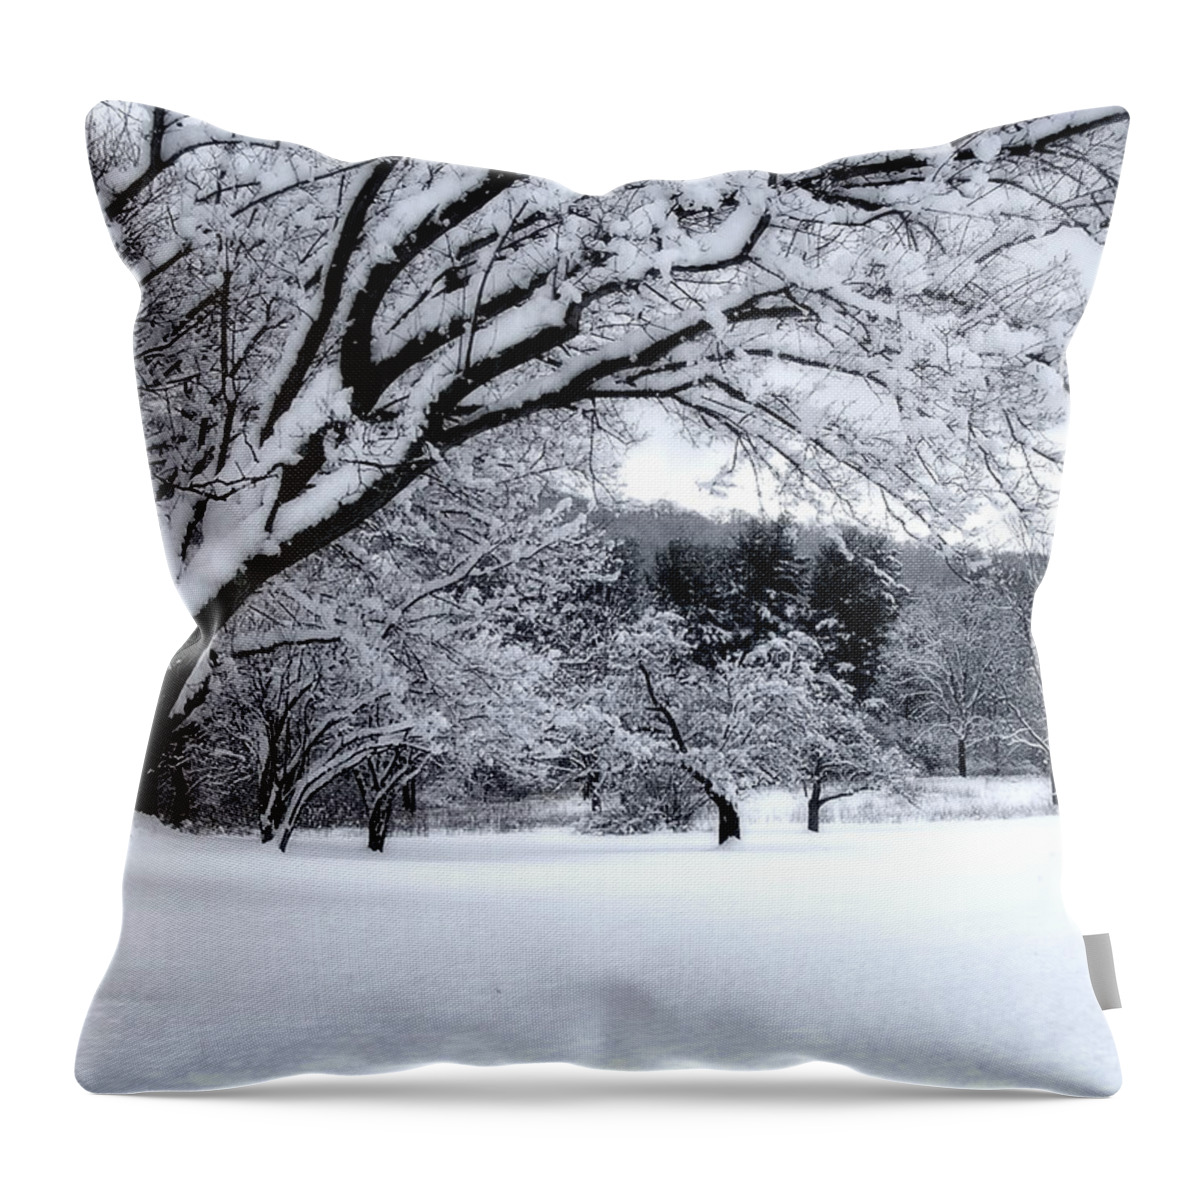 Snow Throw Pillow featuring the digital art Snowfall by Bruce Rolff